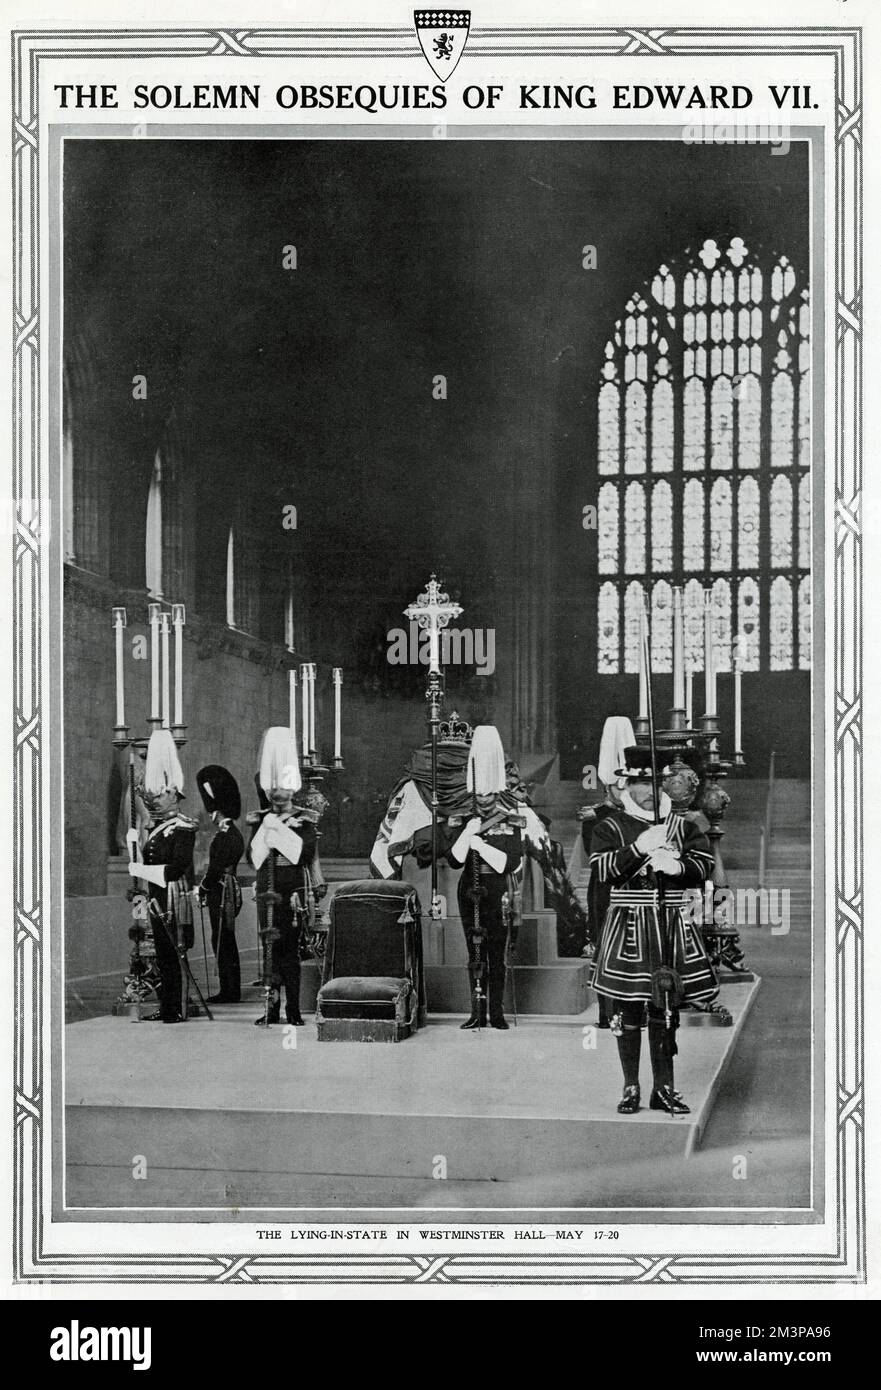 A very brief illness ended the life of Edward VII, who passed away on 6 May 1910, at the age of 69. The King's body lay-in-state in Westminister Hall, guarded by officers of the Household troops, Gentlemen-at-Arms and Yeomen of the Guard.  17 - 20 May 1910 Stock Photo